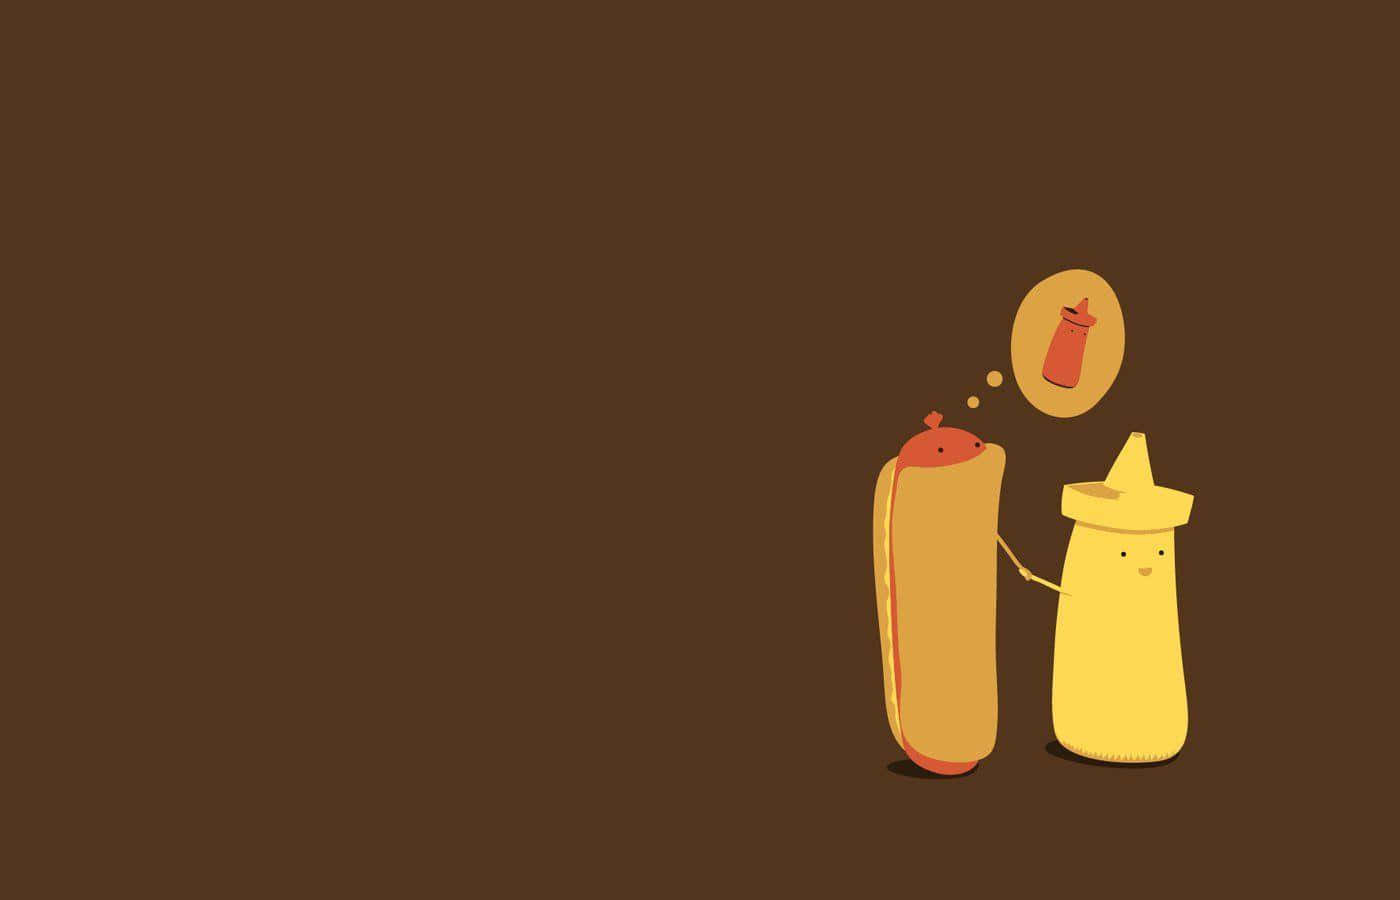 A Cartoon Of A Hot Dog And A Ketchup Bottle